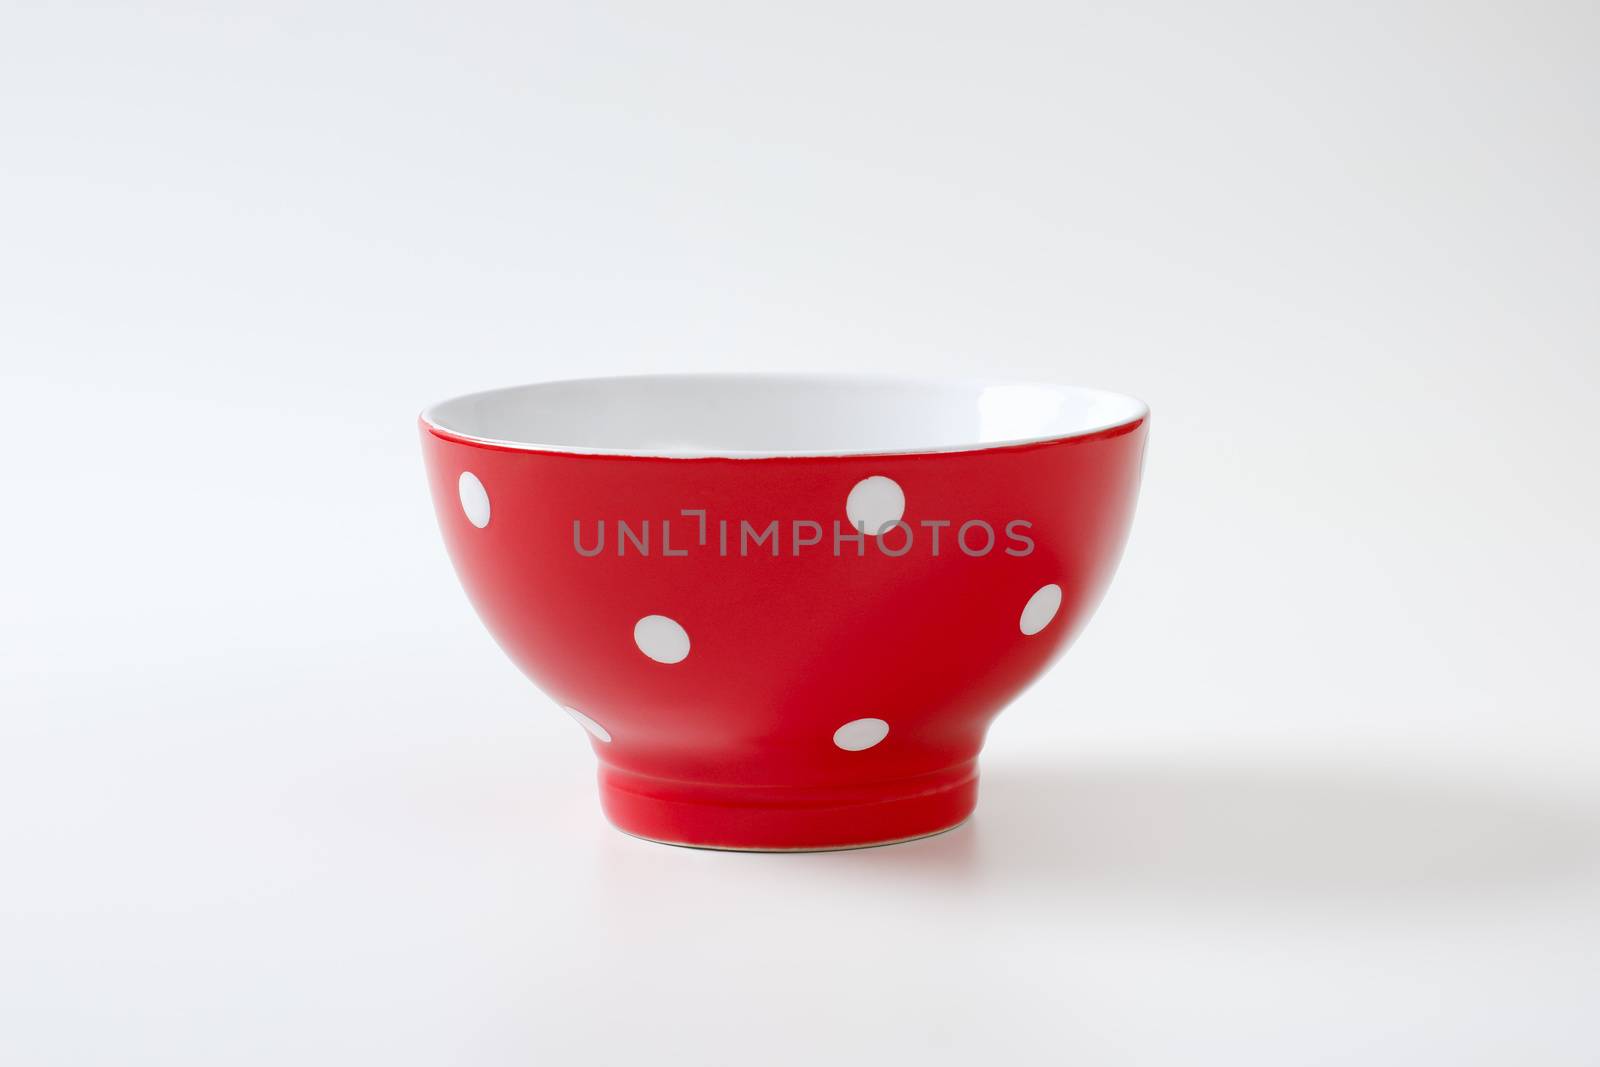 Empty red and white polka dot bowl by Digifoodstock